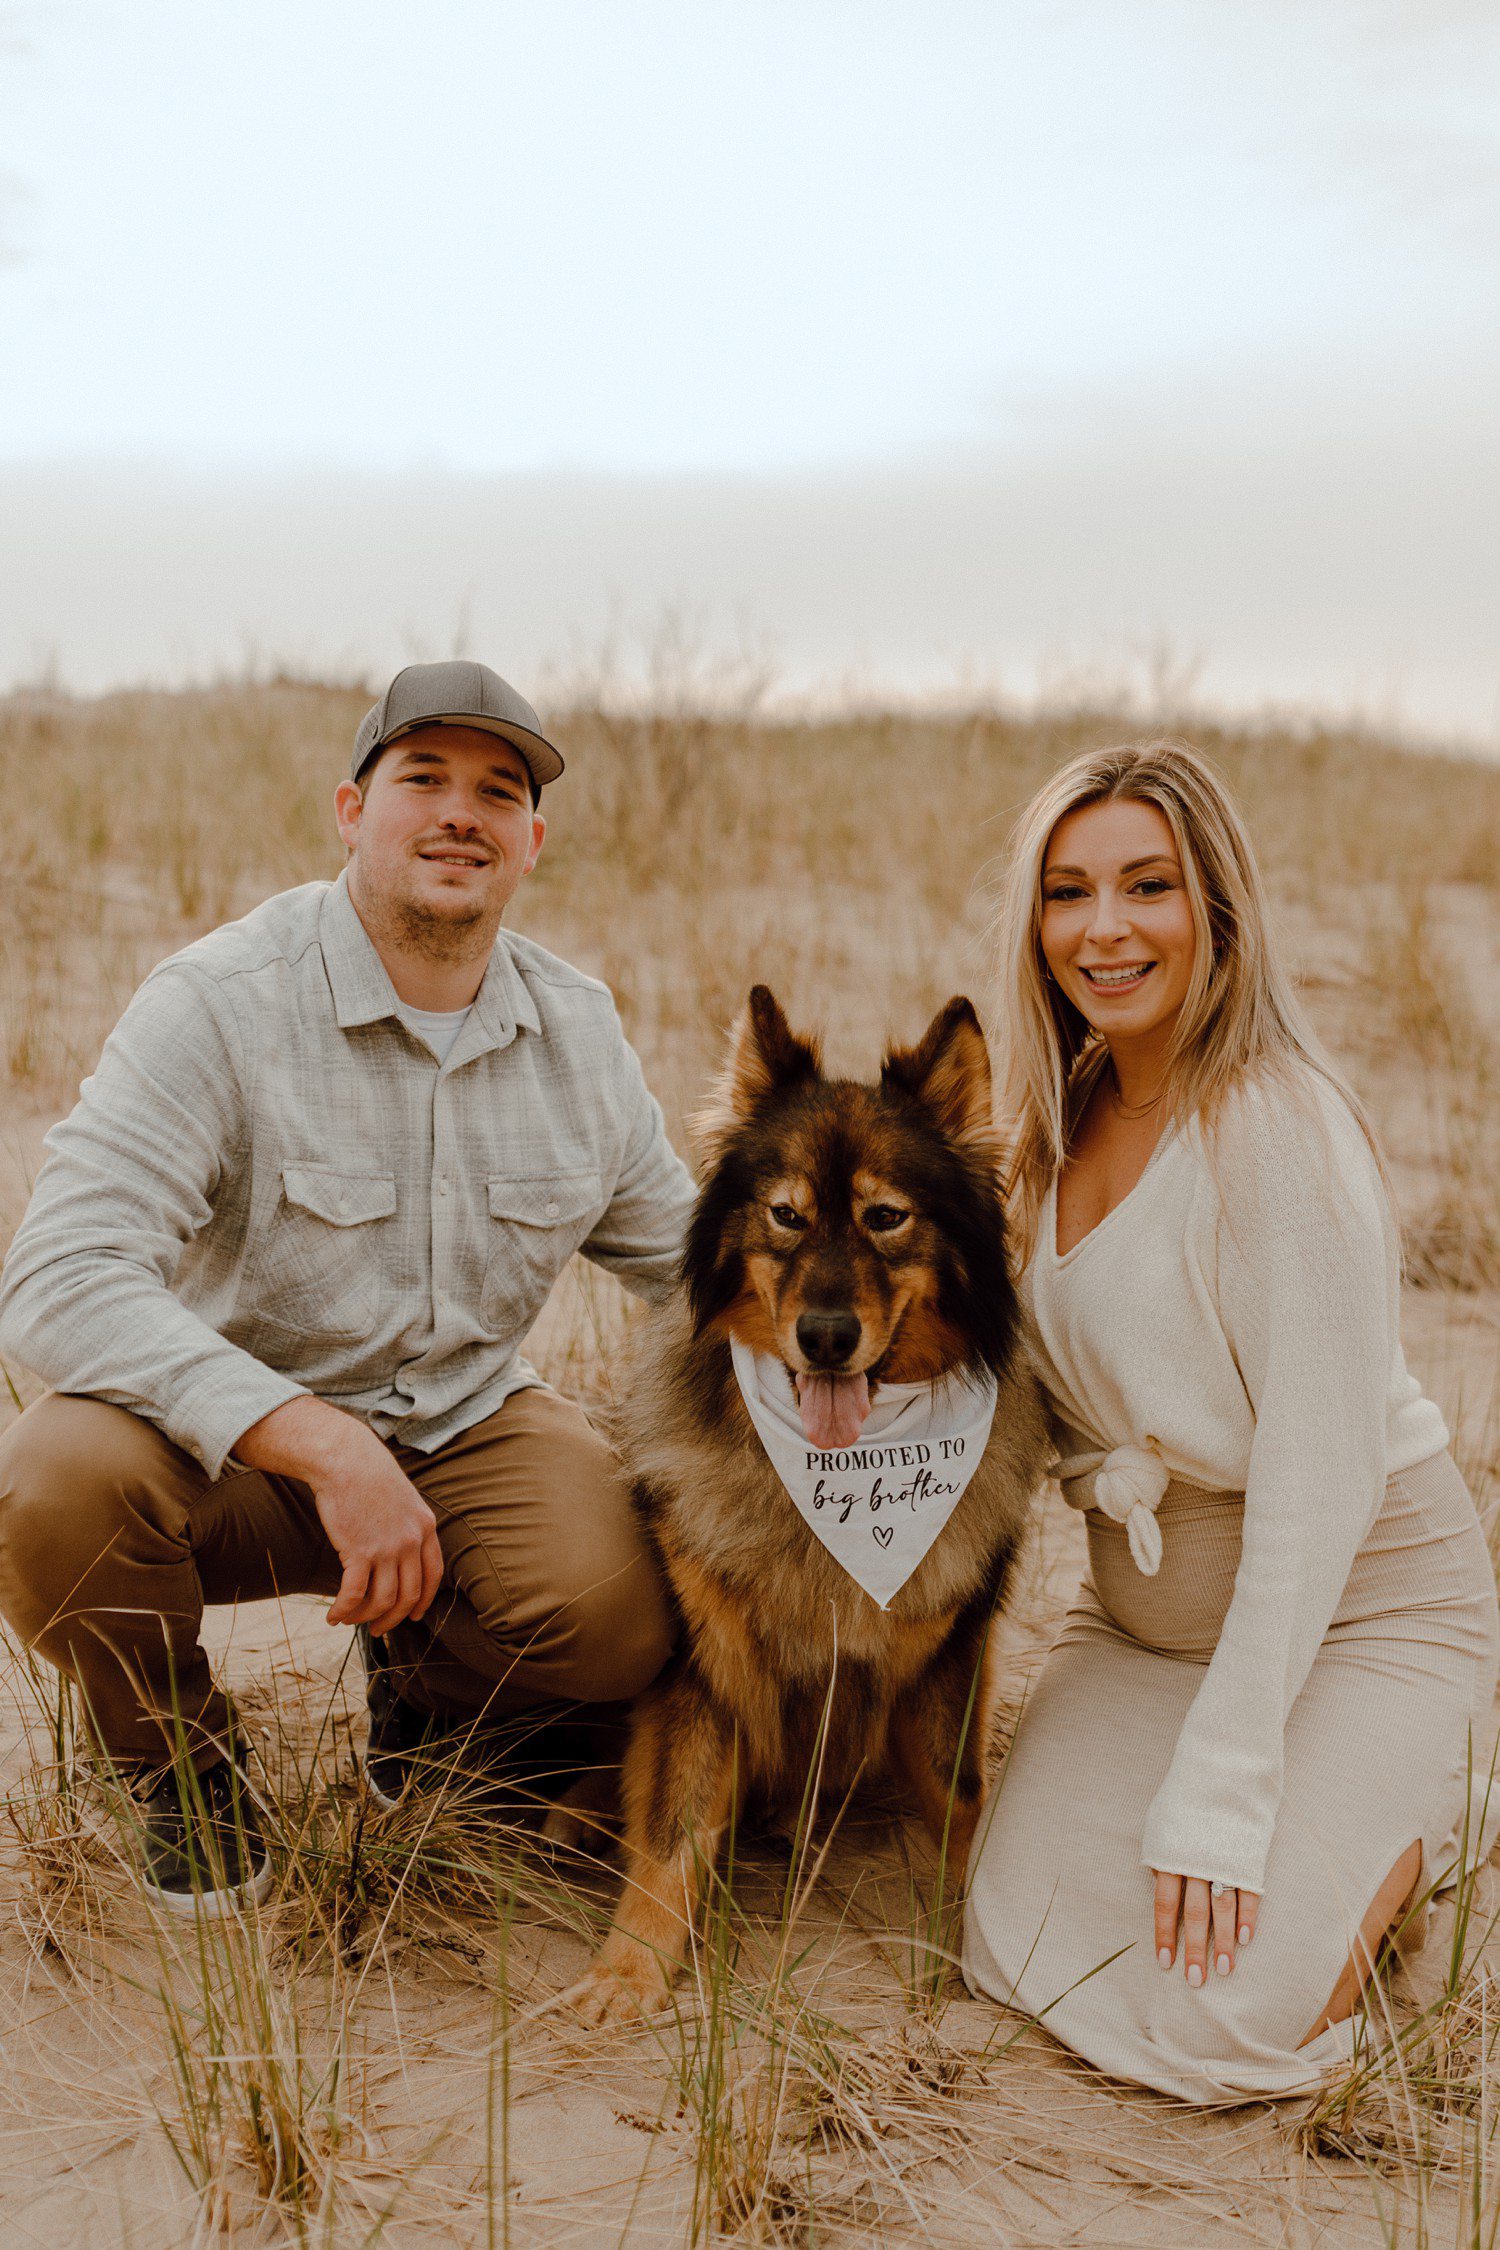 Michigan pregnancy announcement photos with dog